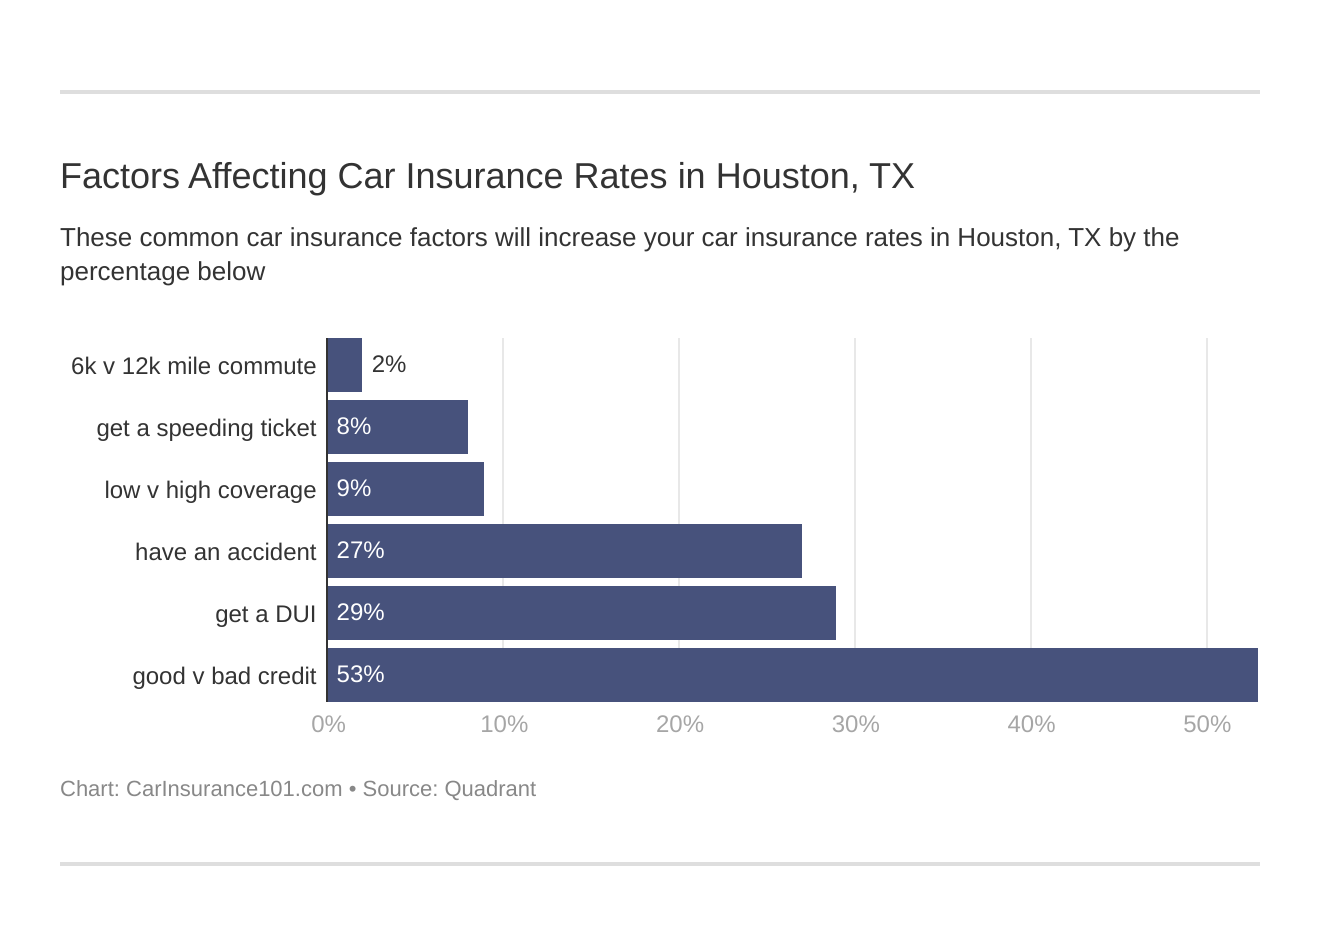 Factors Affecting Car Insurance Rates in Houston, TX